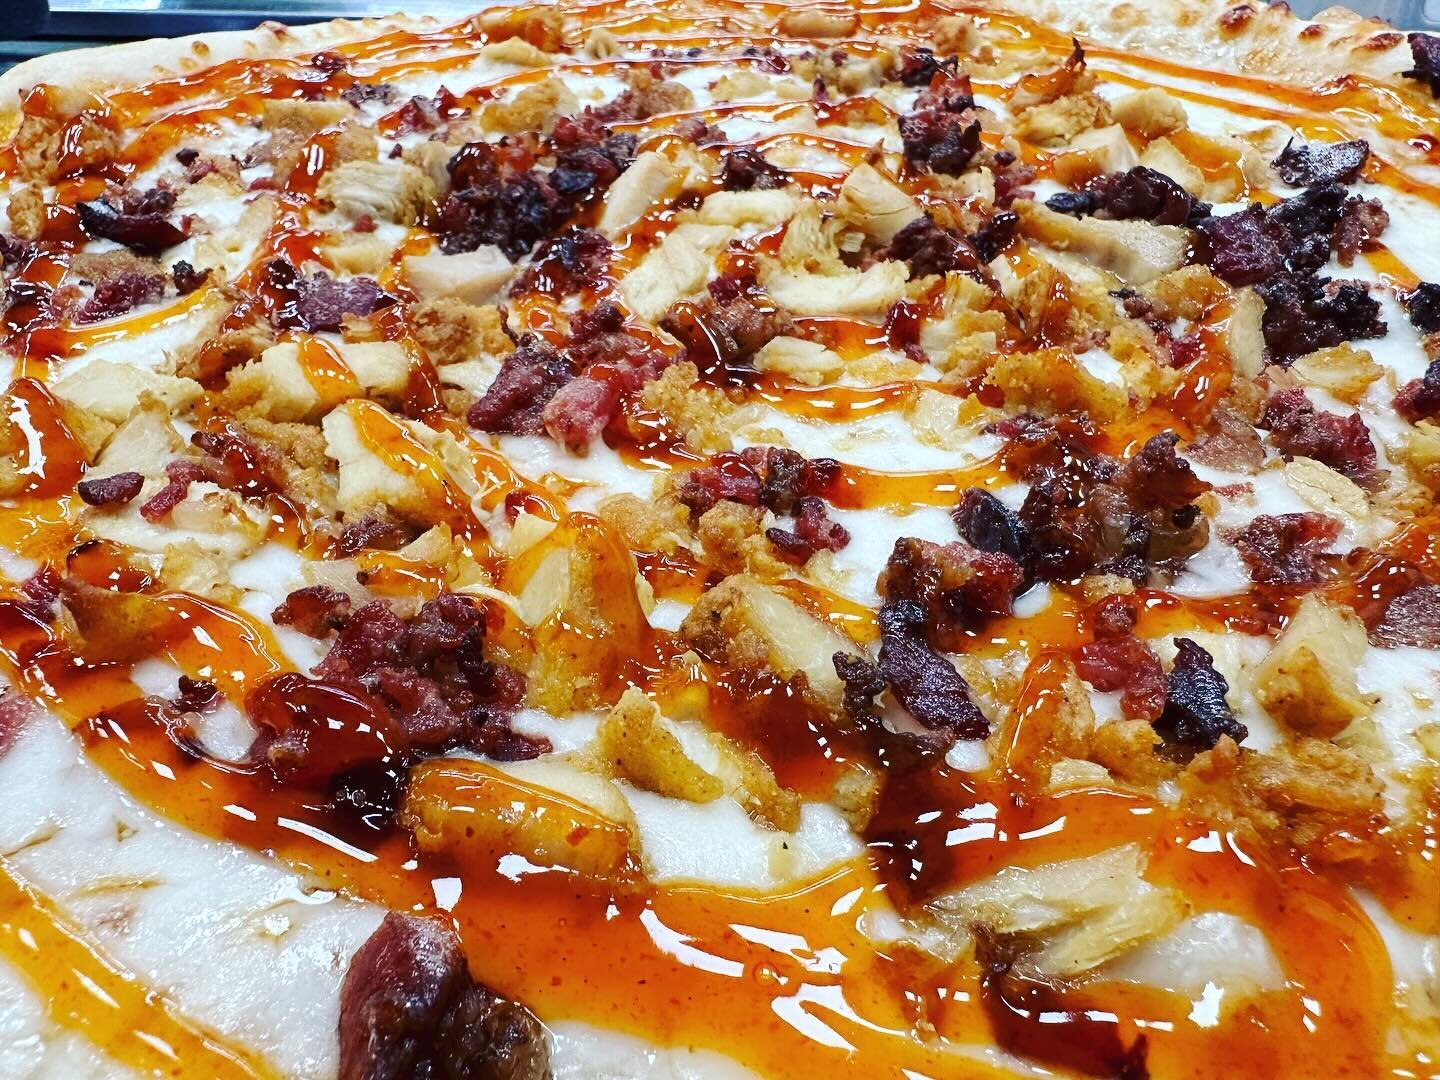 We plan to stay HOT for the month of November!

This month&rsquo;s Monthly special is our Hot Honey Chicken Pizza!

Hot honey sauce base, mozzarella cheese, duke&rsquo;s fried chicken tenders, bacon, topped off with more of our signature Hot Honey Sa